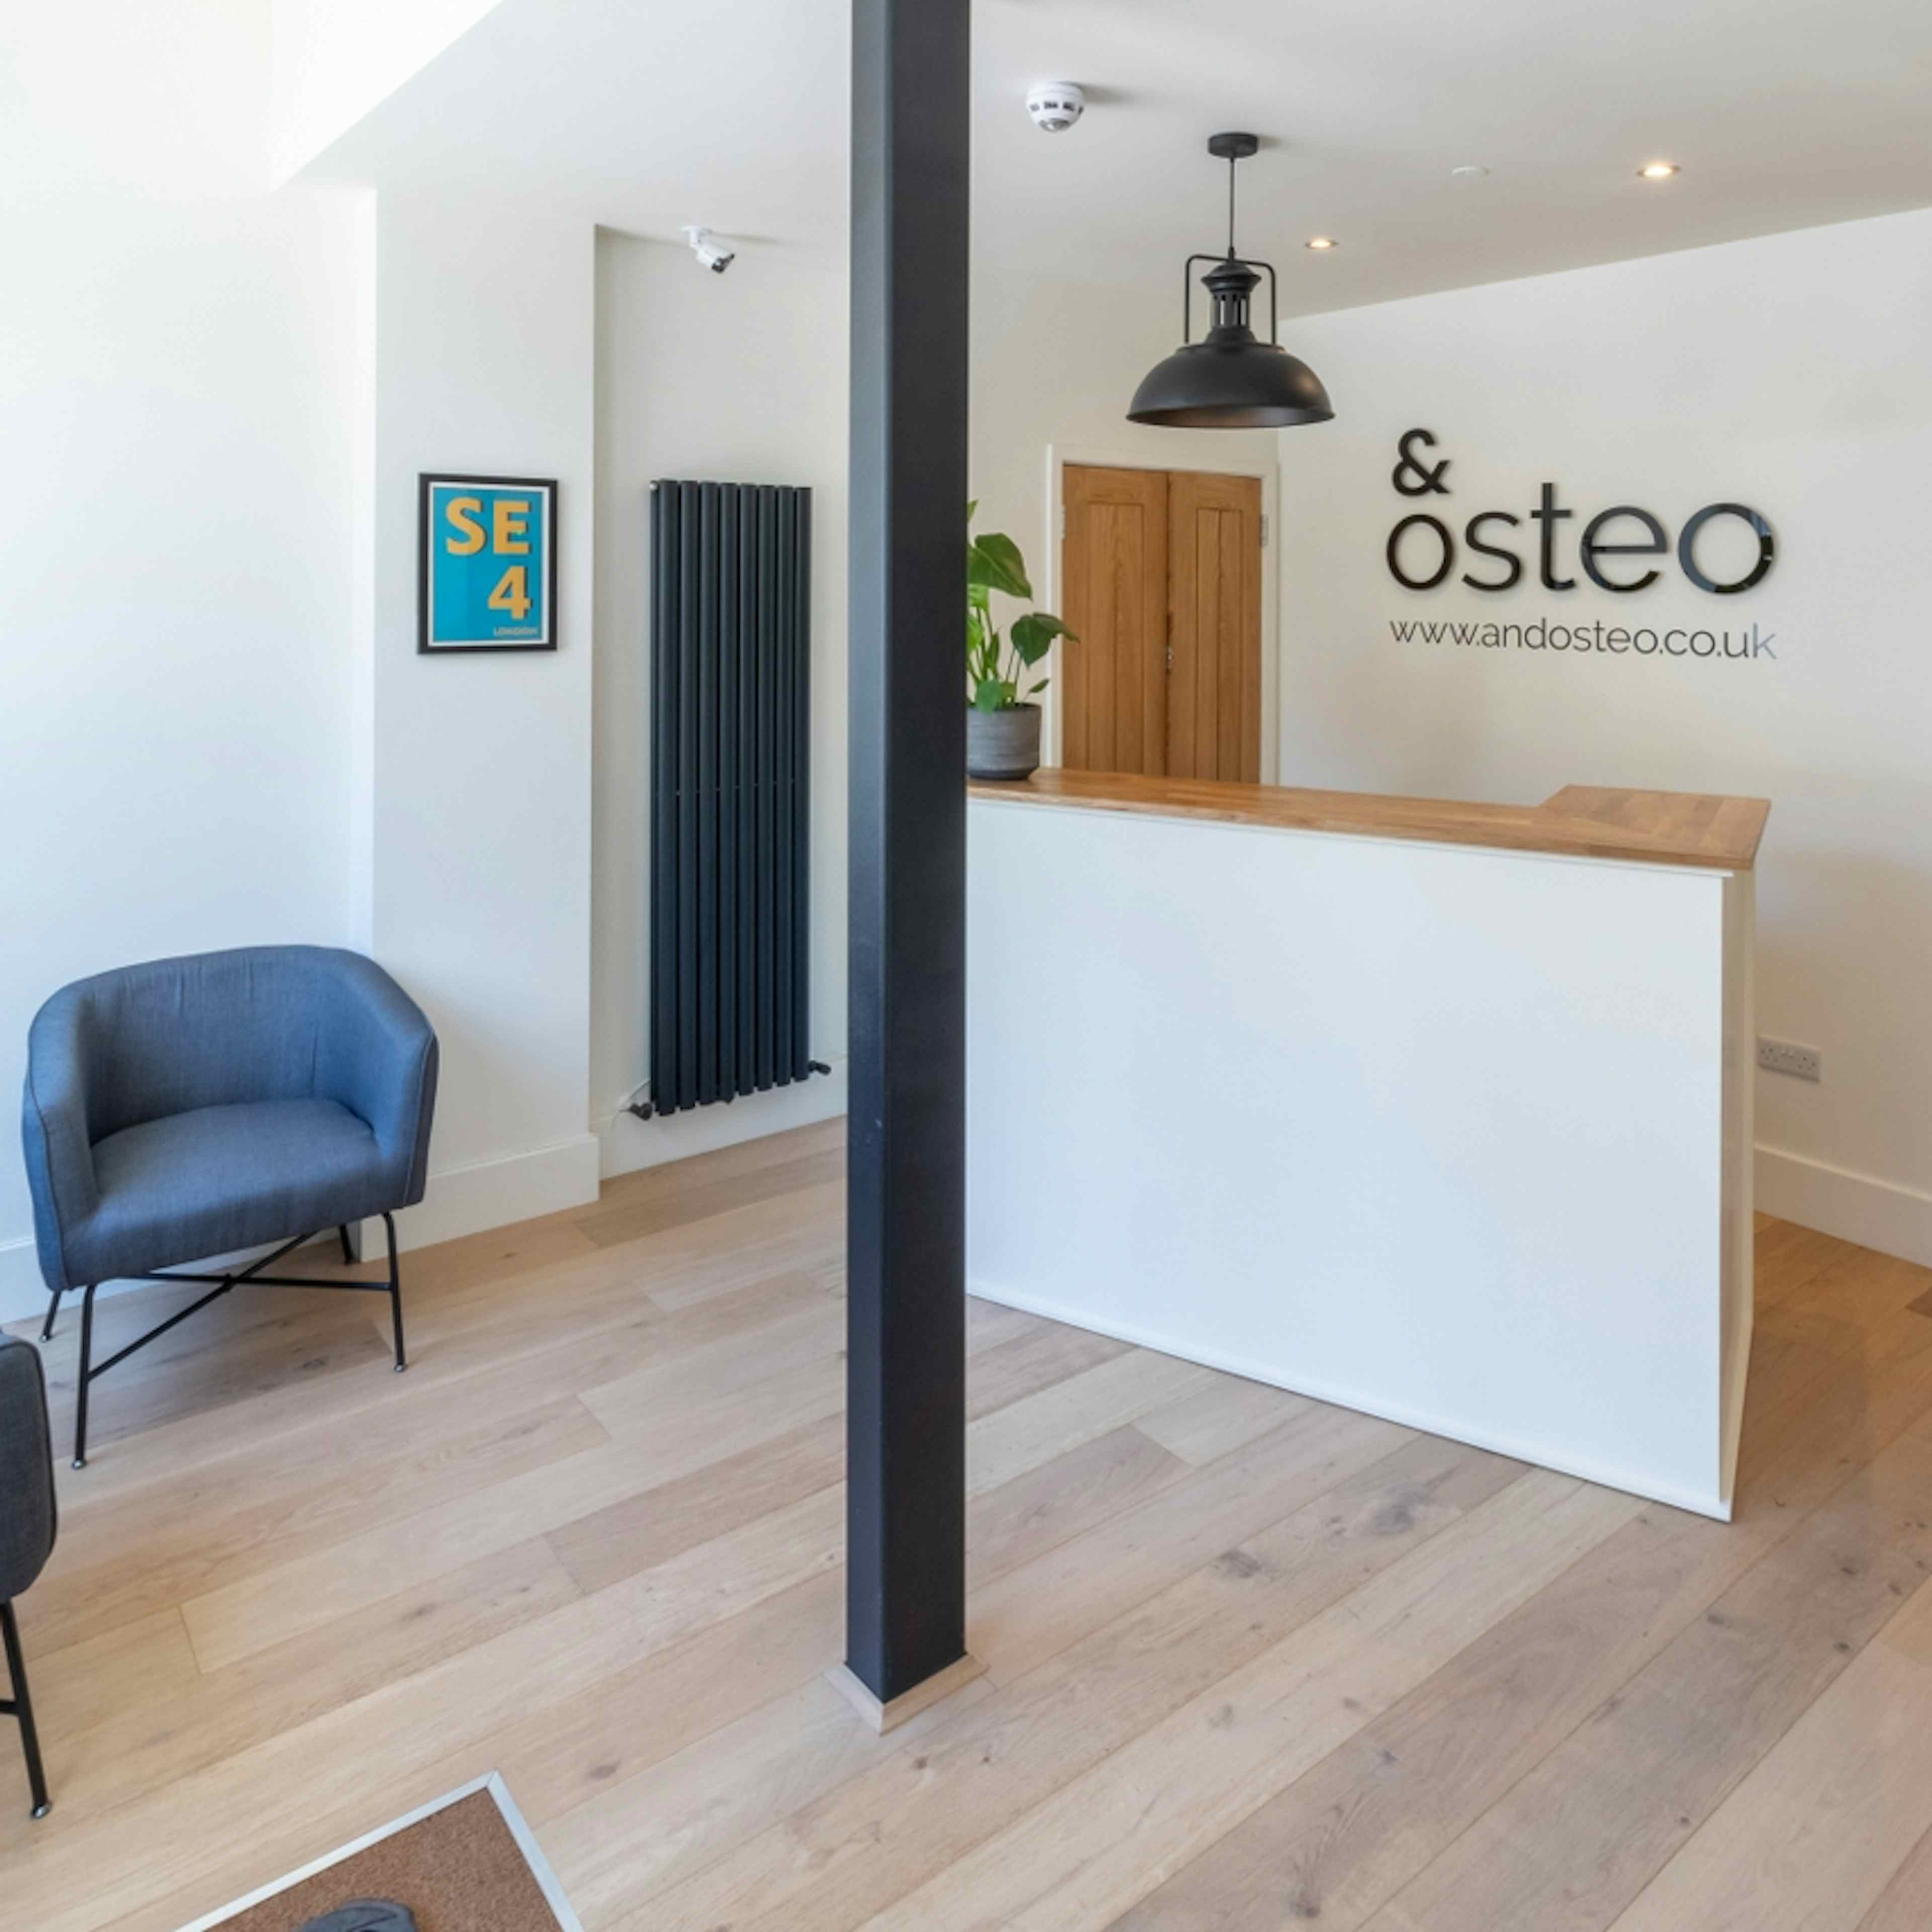 &osteo - Therapy room image 2